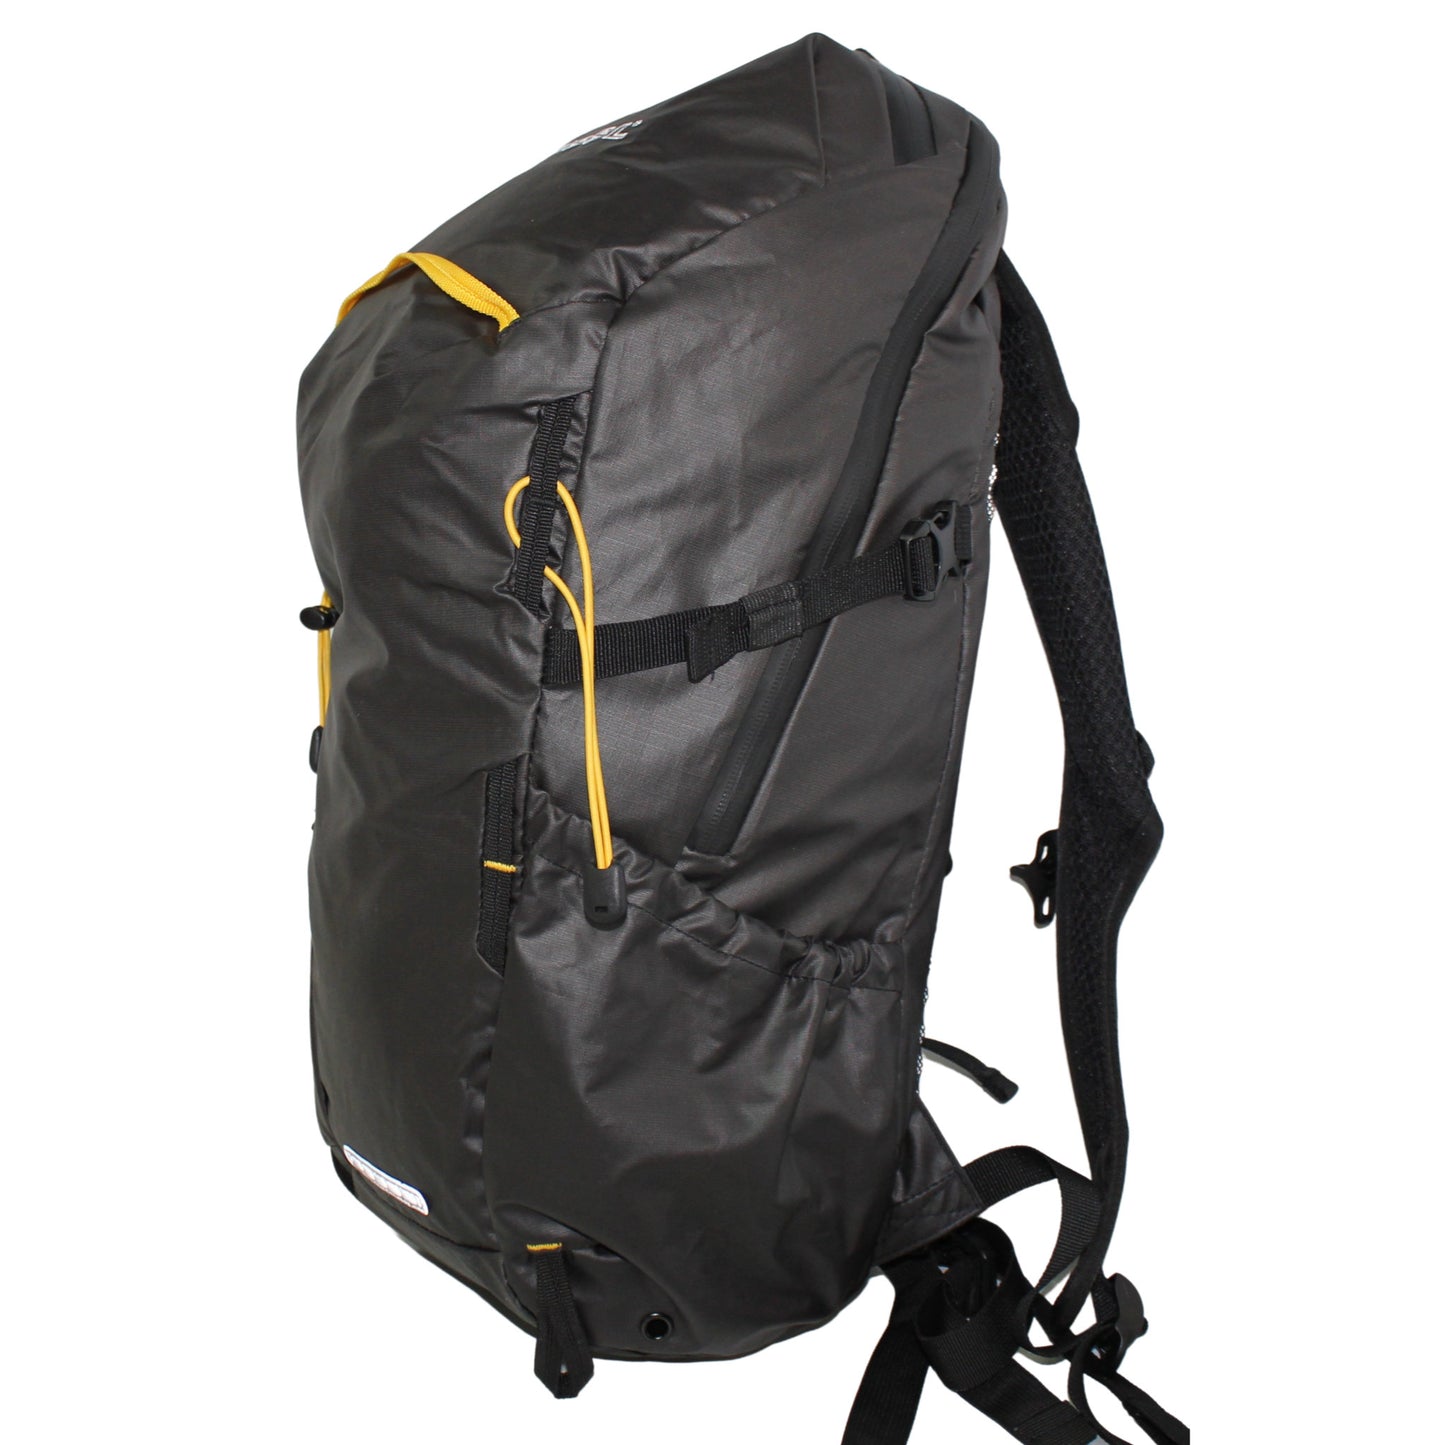 RU668 Extra light sports and hiking backpack